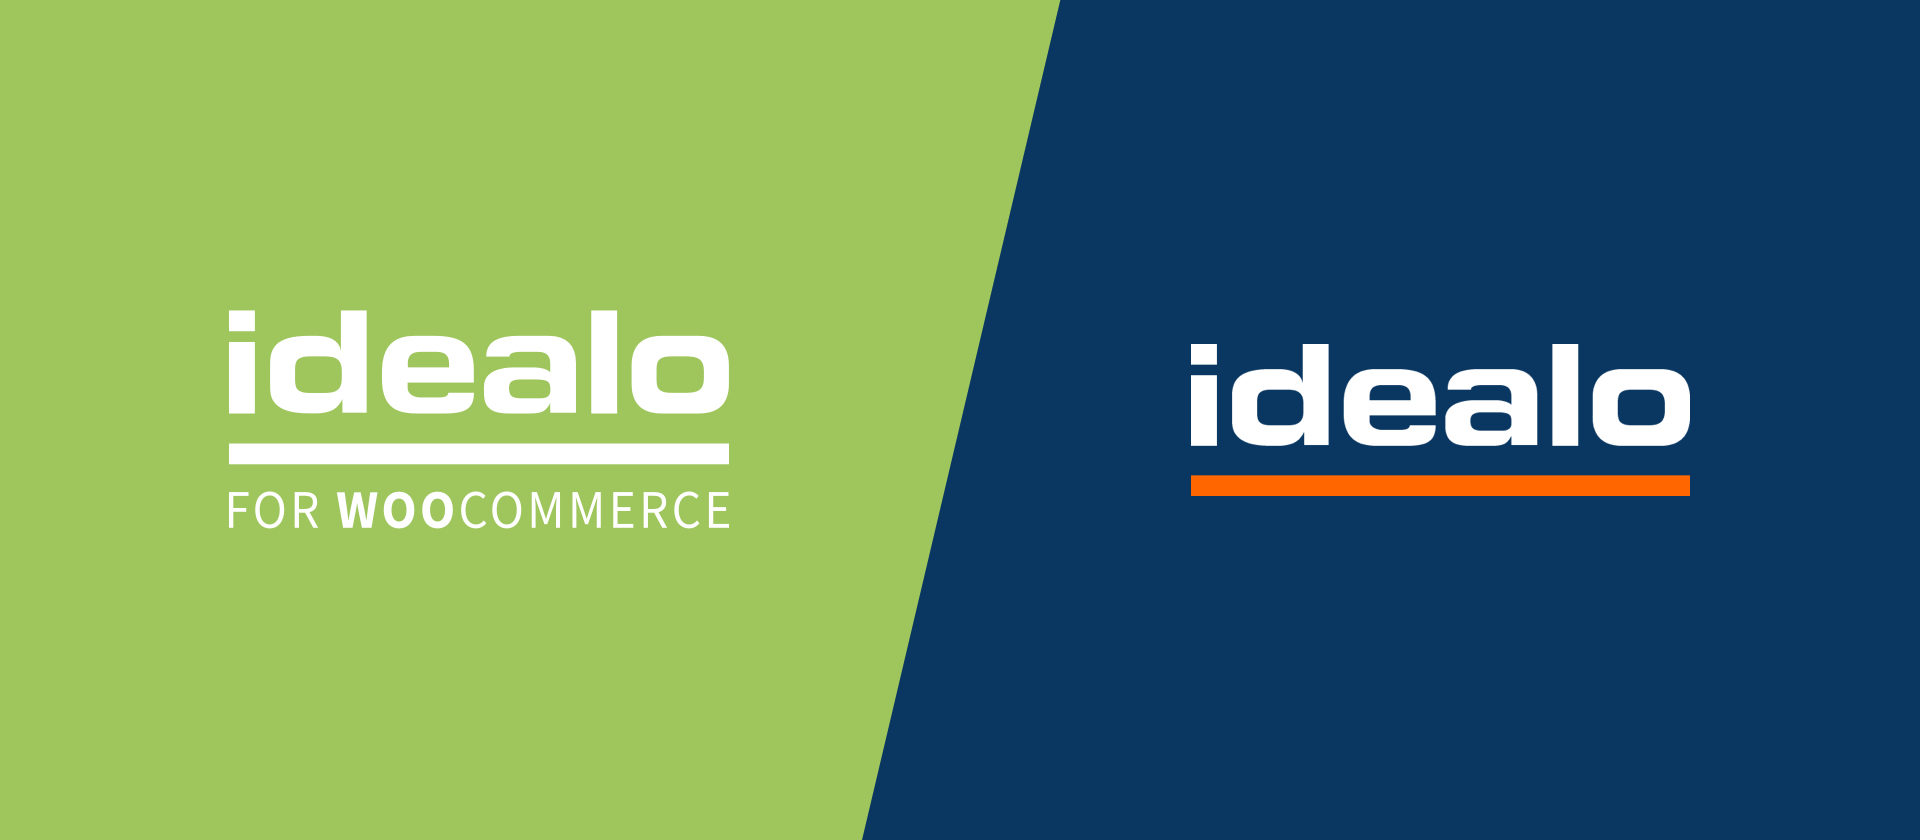 idealo for WooCommerce: Connect your WooCommerce Shop with idealo